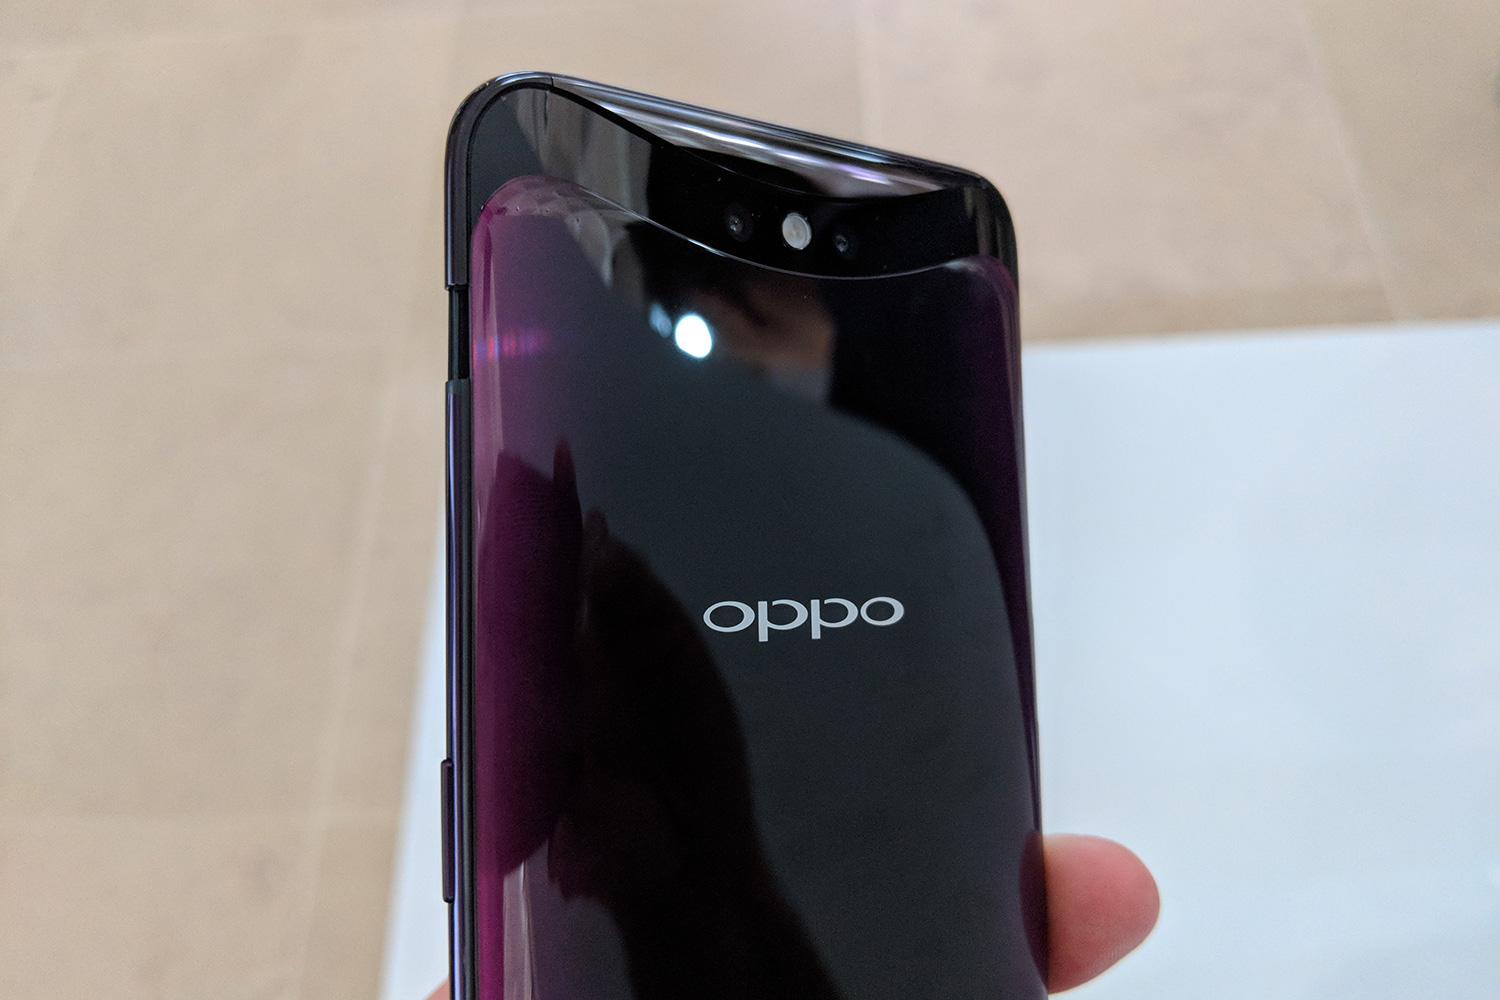 Oppo Find X Mobile Phone, Phone X 256gb Original, Snapdragon 845